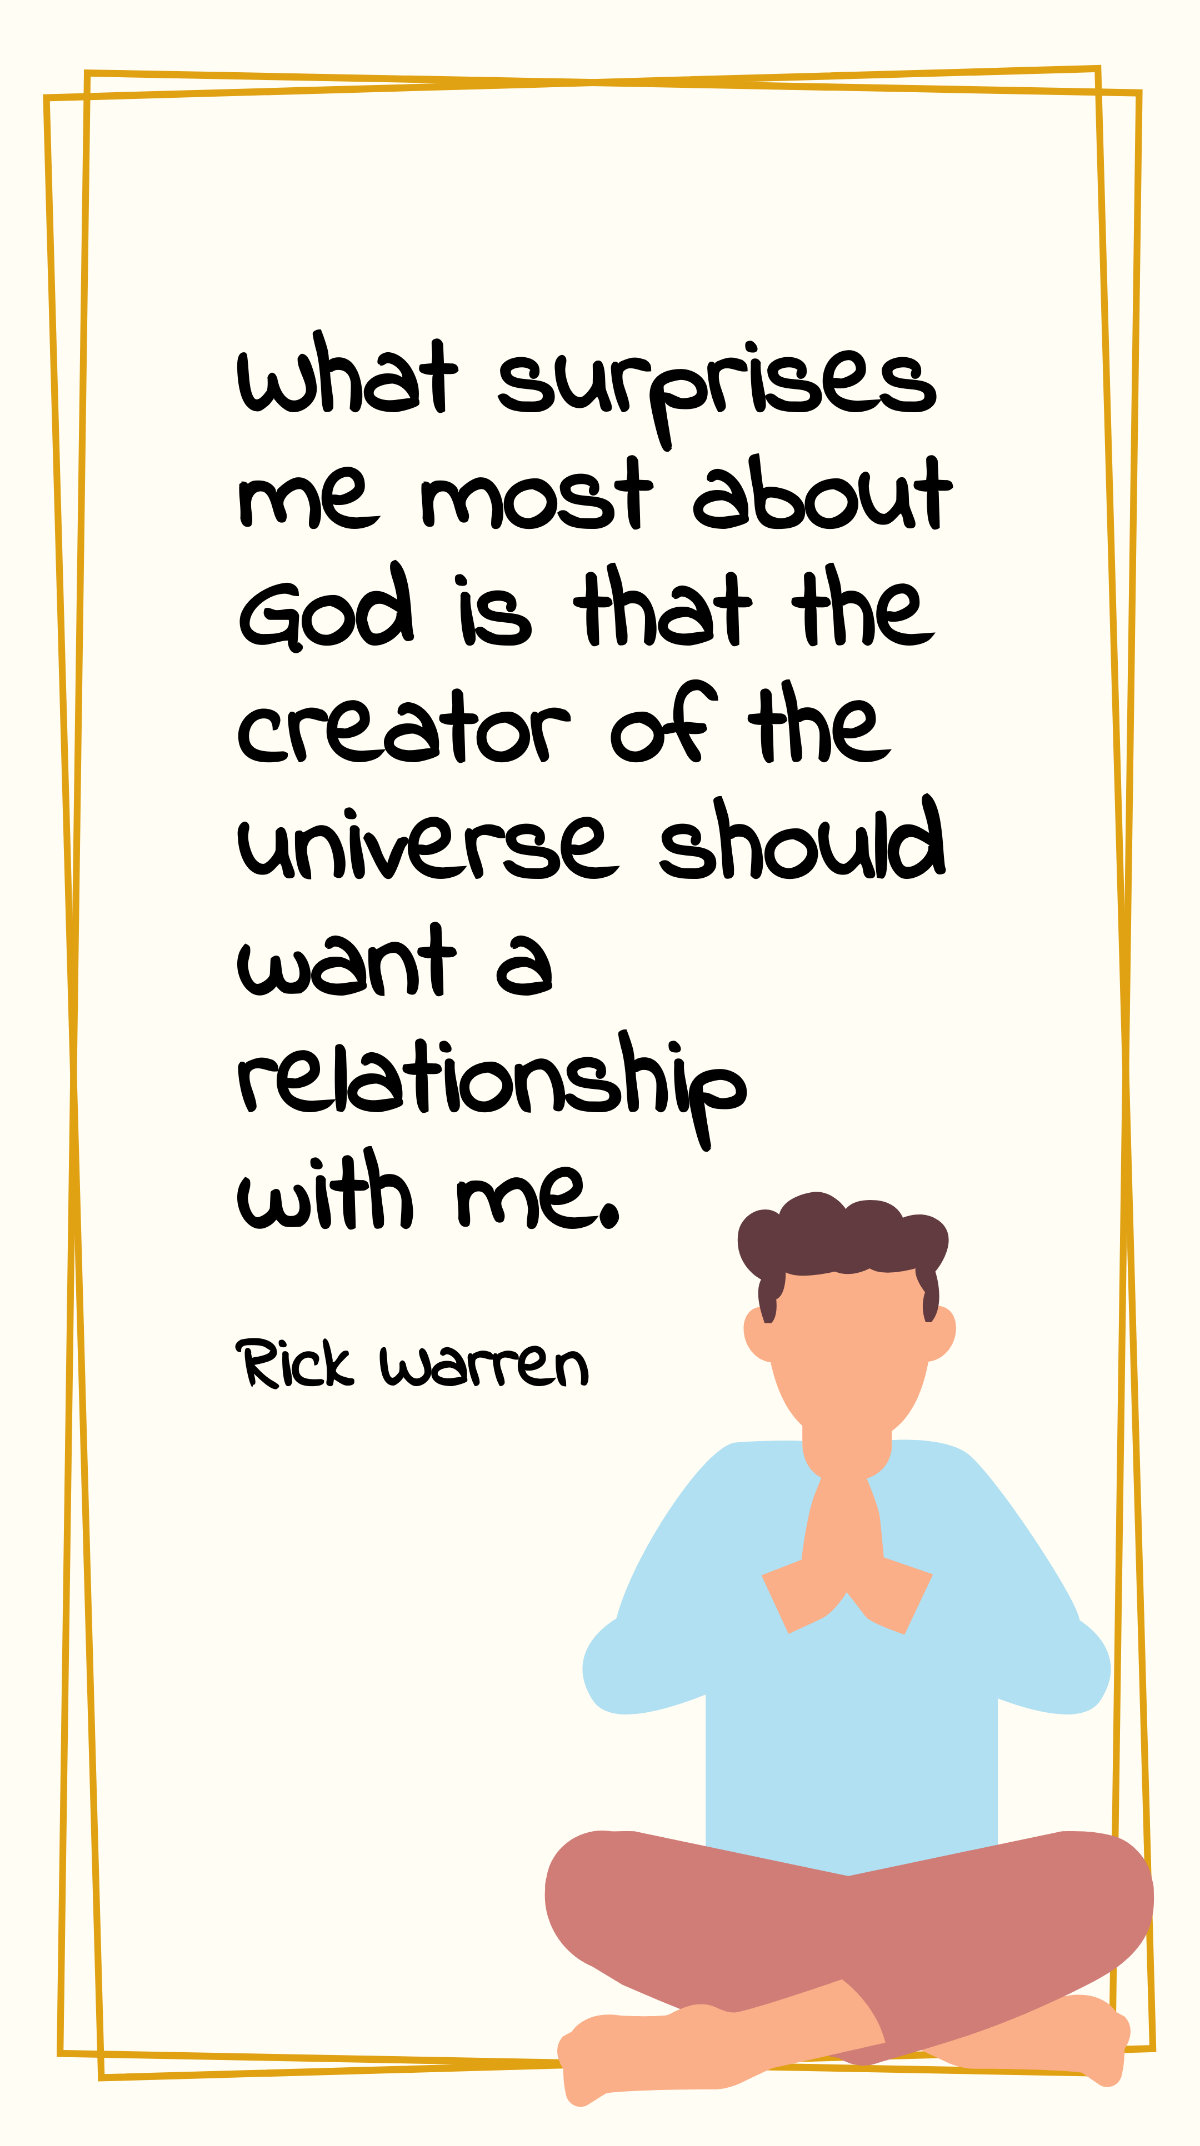 Rick Warren - What surprises me most about God is that the creator of the universe should want a relationship with me. Template